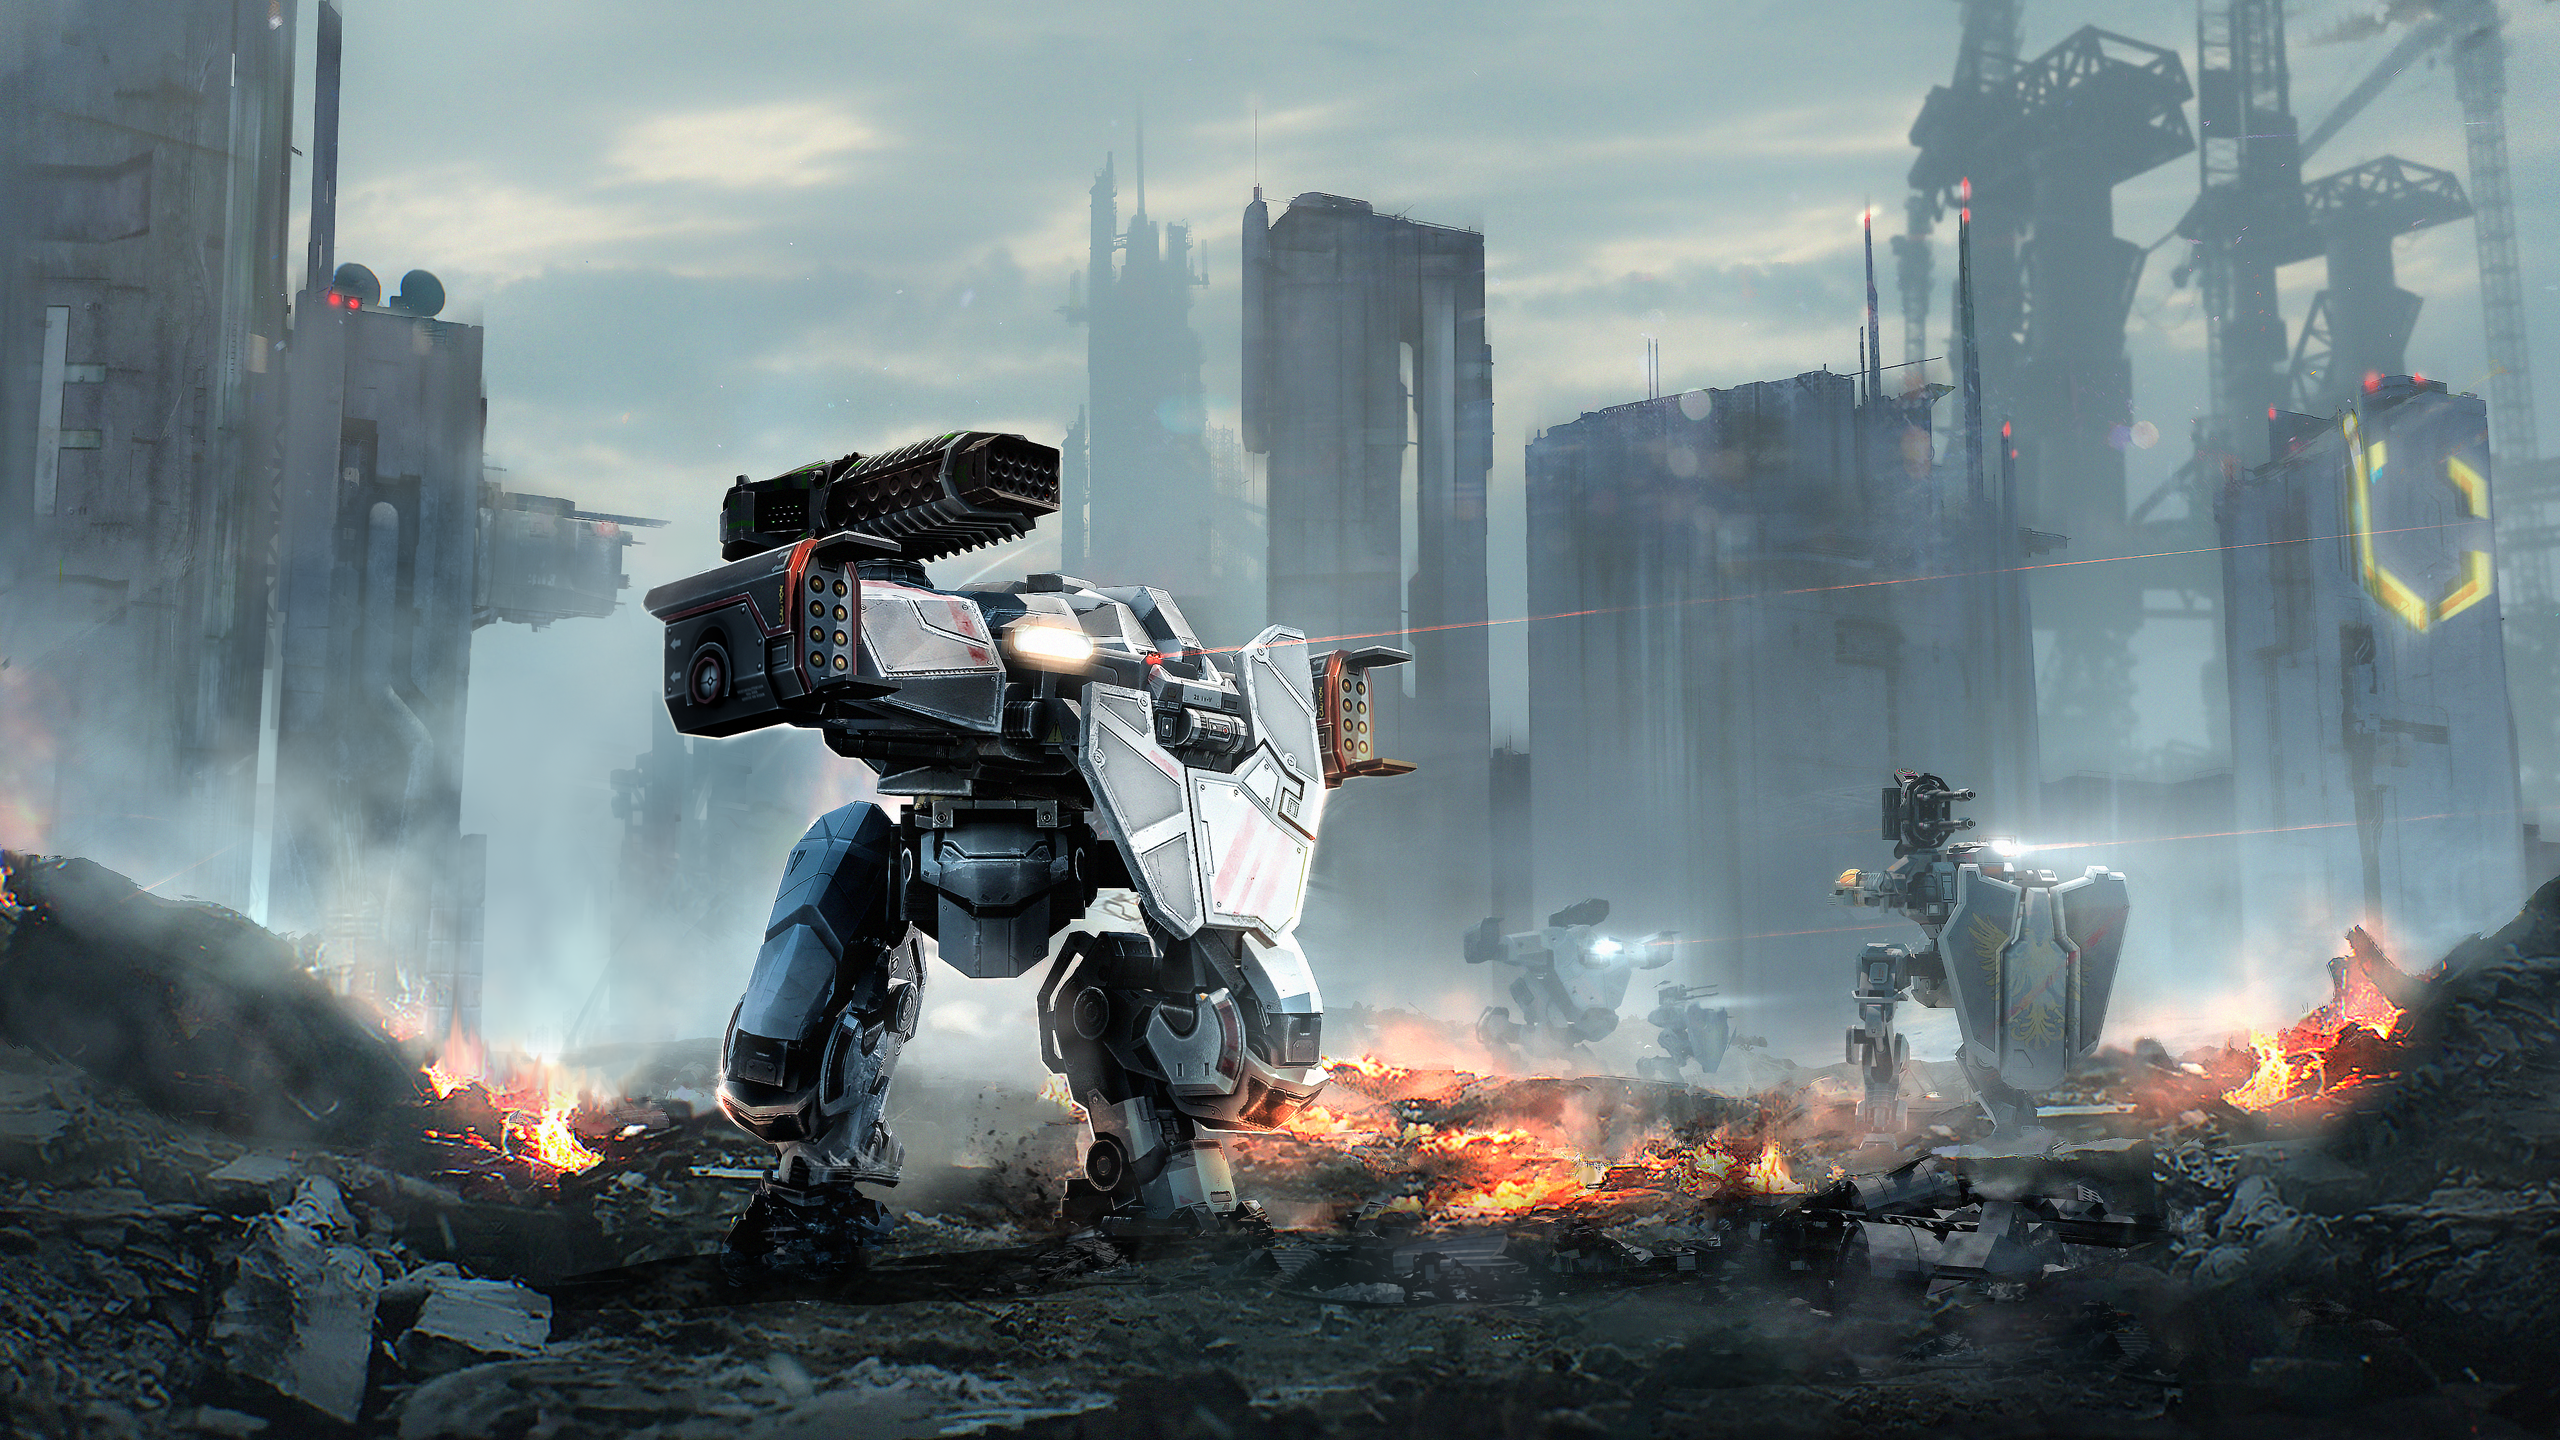 War Robots  Weve compiled a handy collection of War Robots wallpapers  both for PC and mobile Take a look  httpswrappWallpapers  And  dont forget to log into the game and